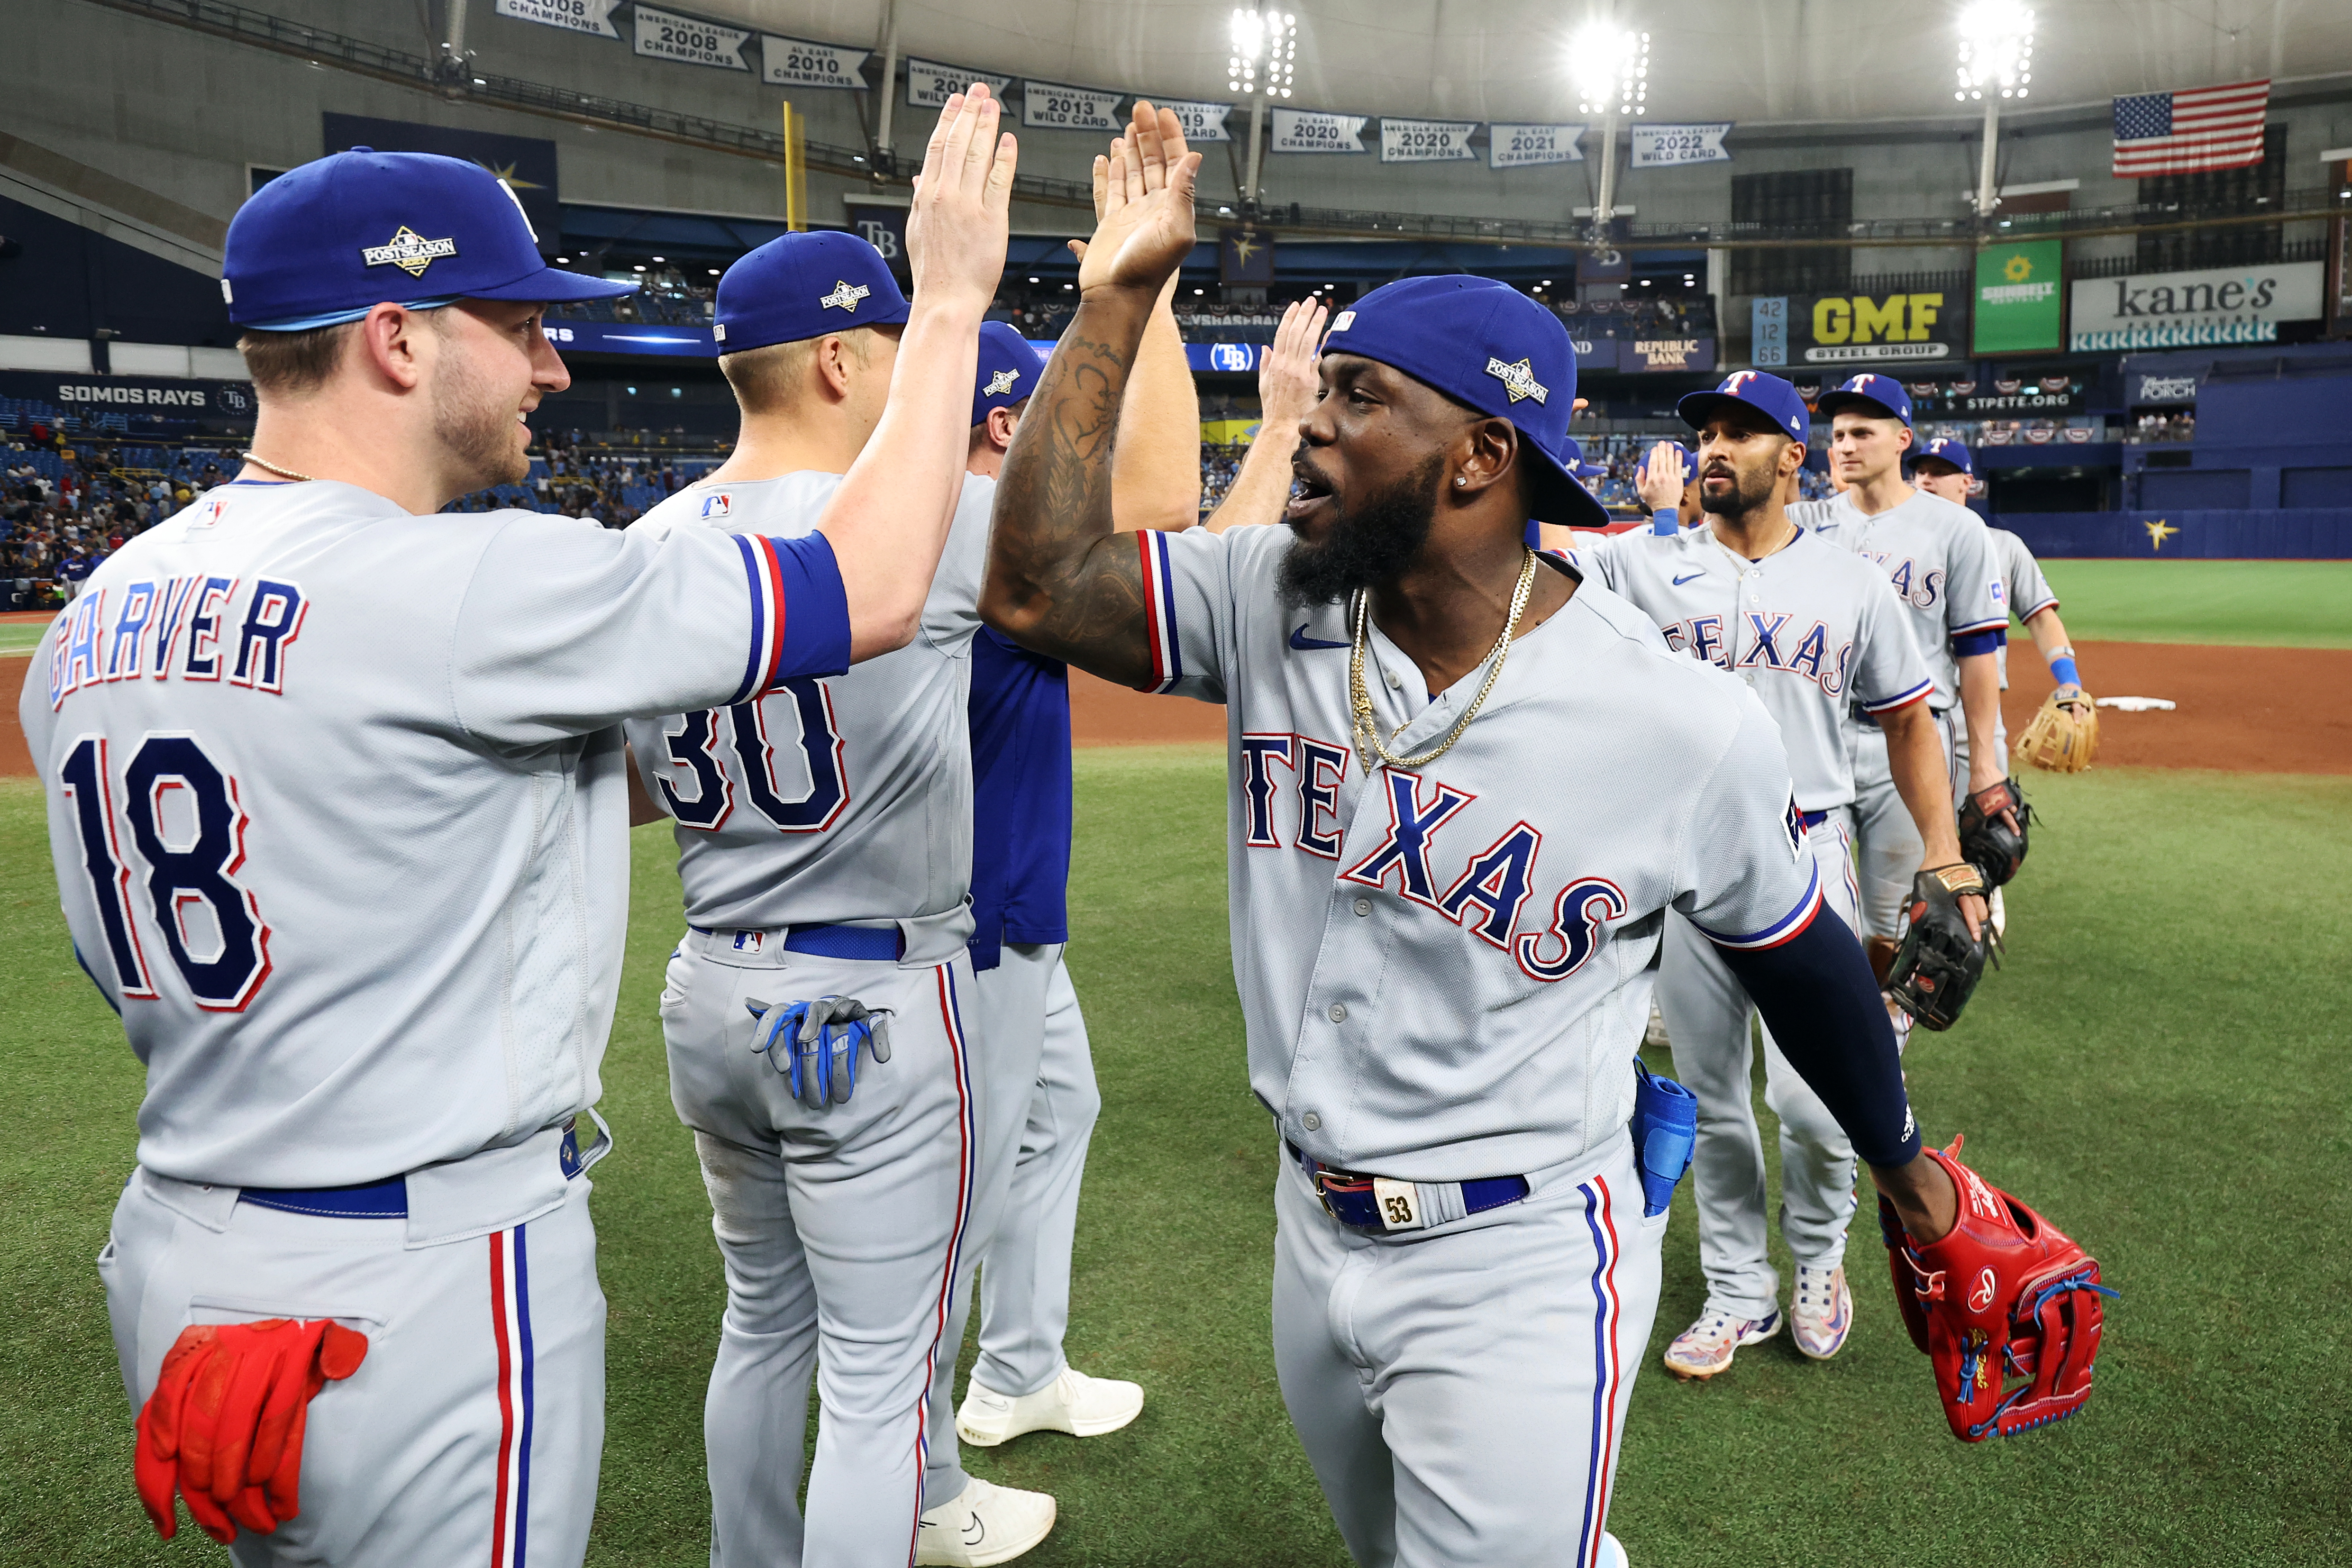 Players of the Taxes Rangers celebrate their 7-1 win over the Tampa Bay Rays in game 2 of the American League Wild Card Series at Tropicana Field in St. Petersburg, Florida, October 4, 2023. /CFP